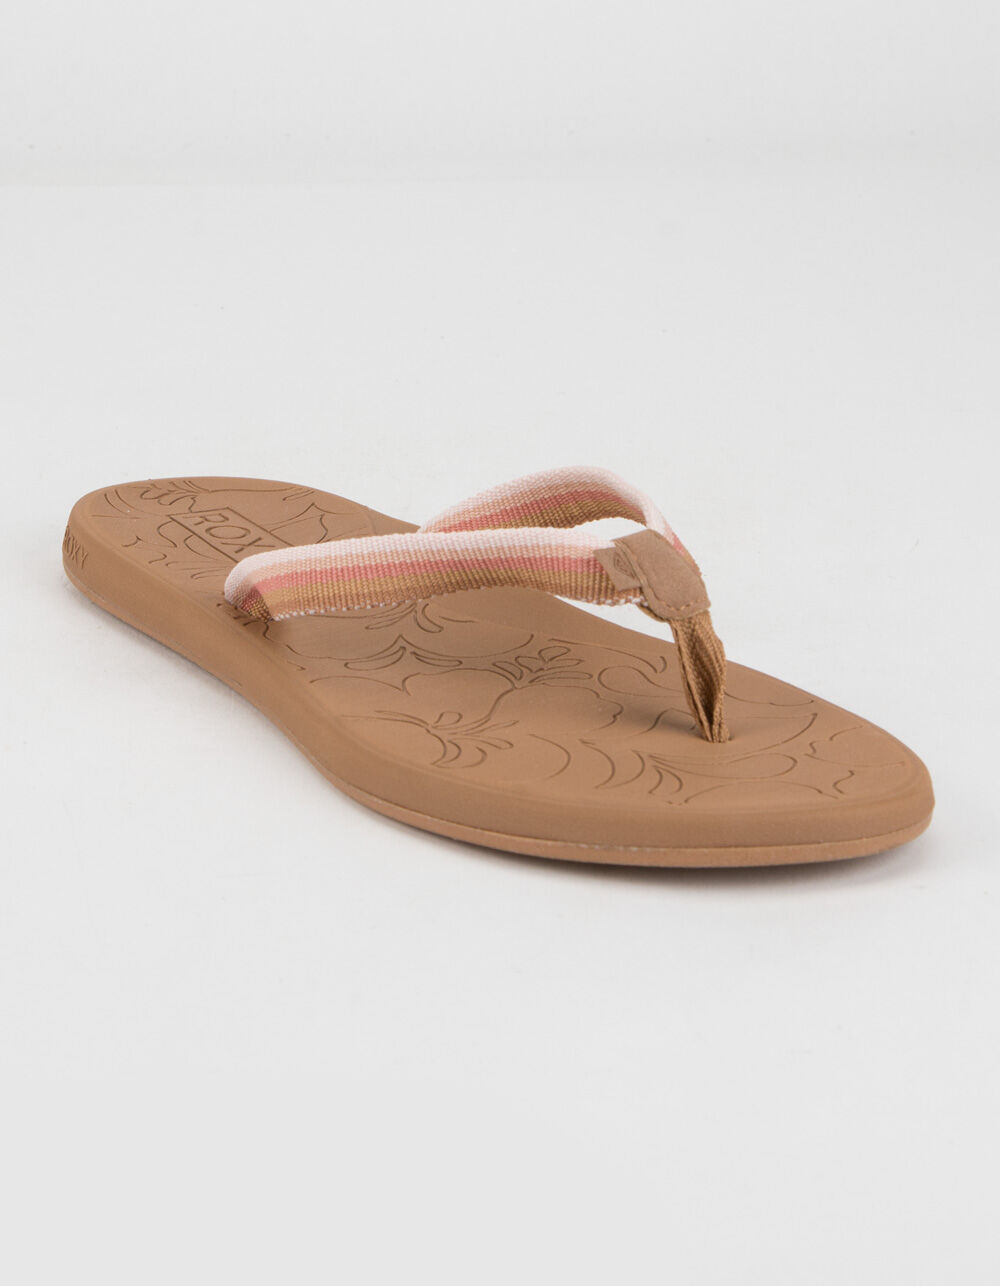 ROXY Colbee Womens Sandals - BLUSH | Tillys